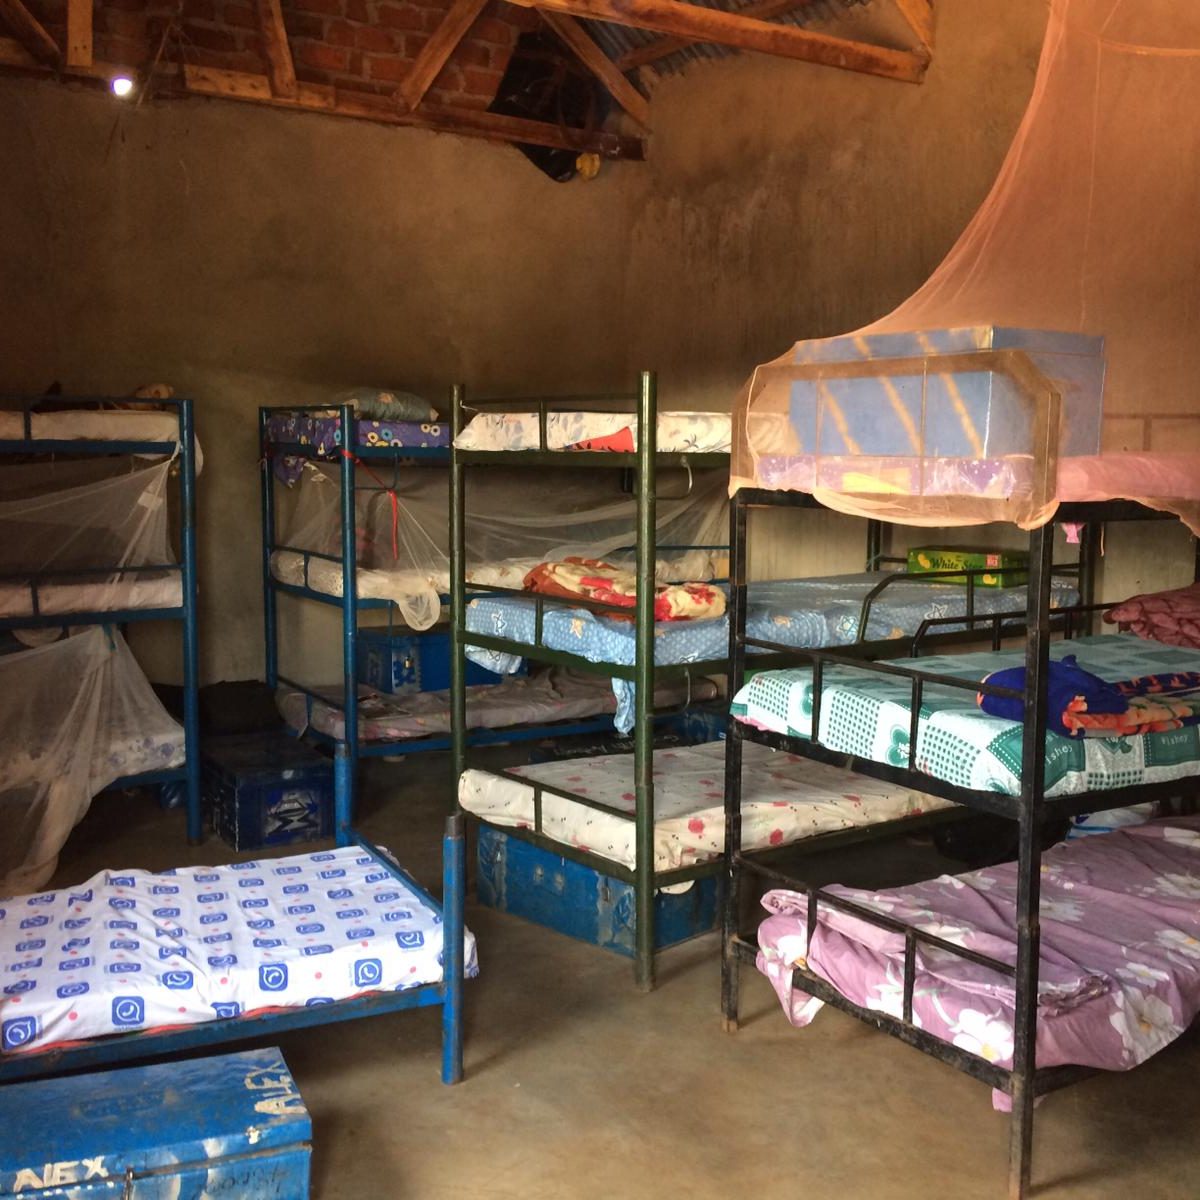 A dormitory, 2 children in each bed on triple bunks